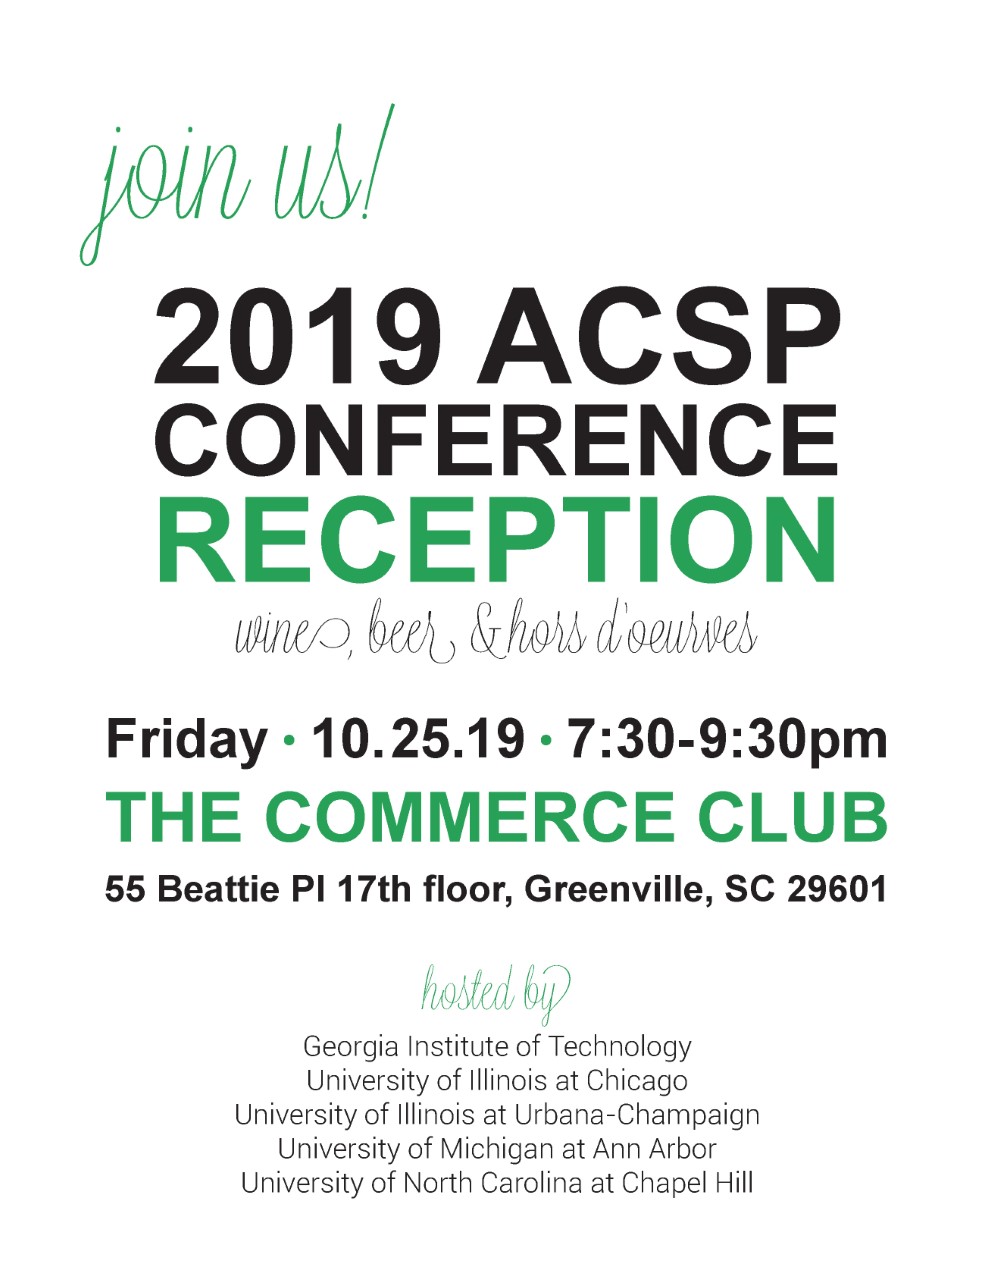 ACSP conference information